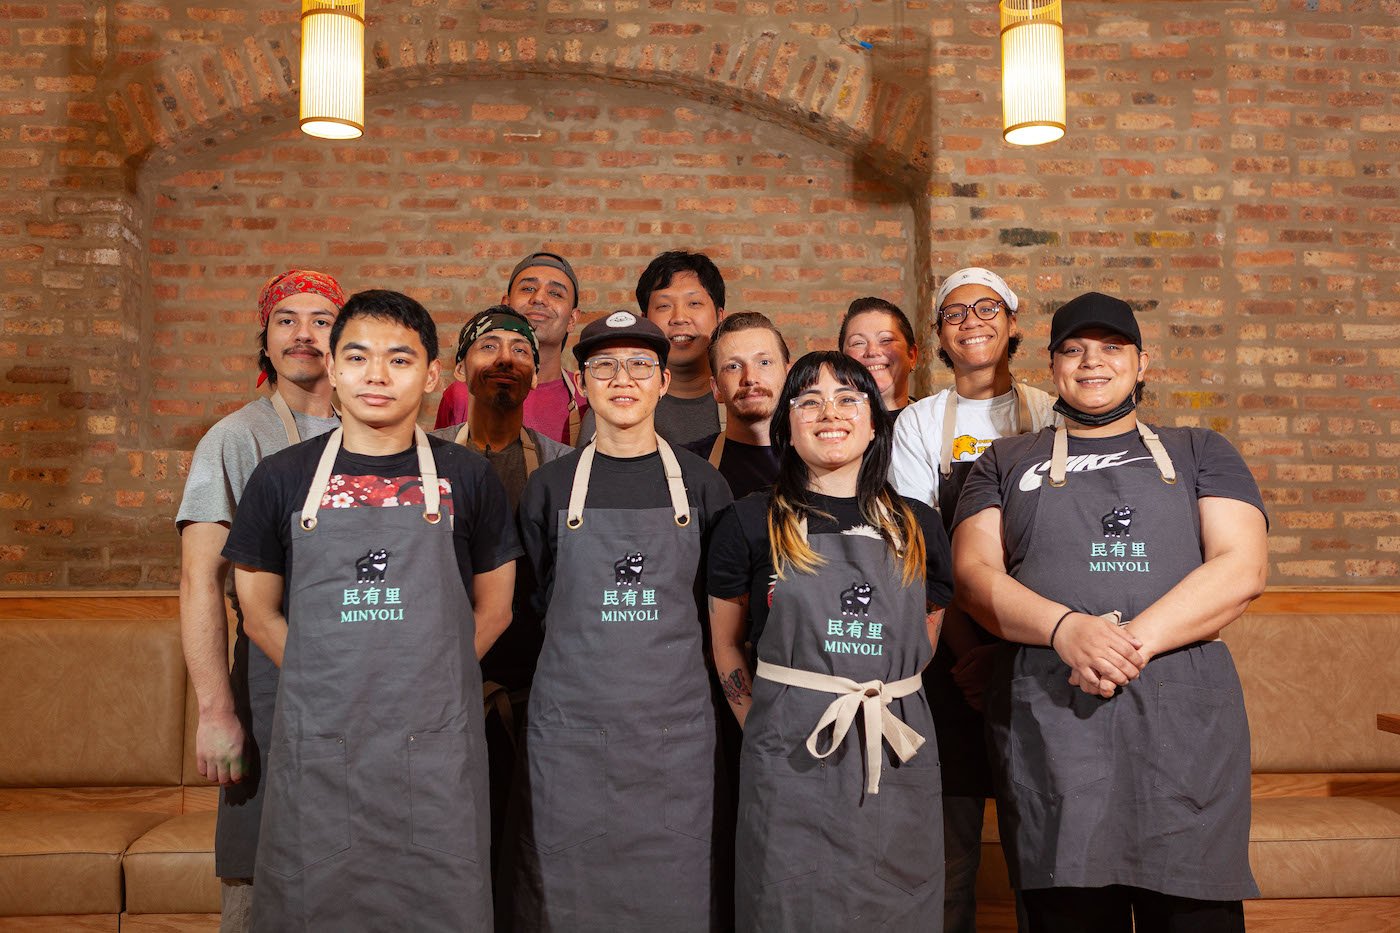 The staff of a restaurant, some in aprons with its name and logo, stand and smile for a group photo